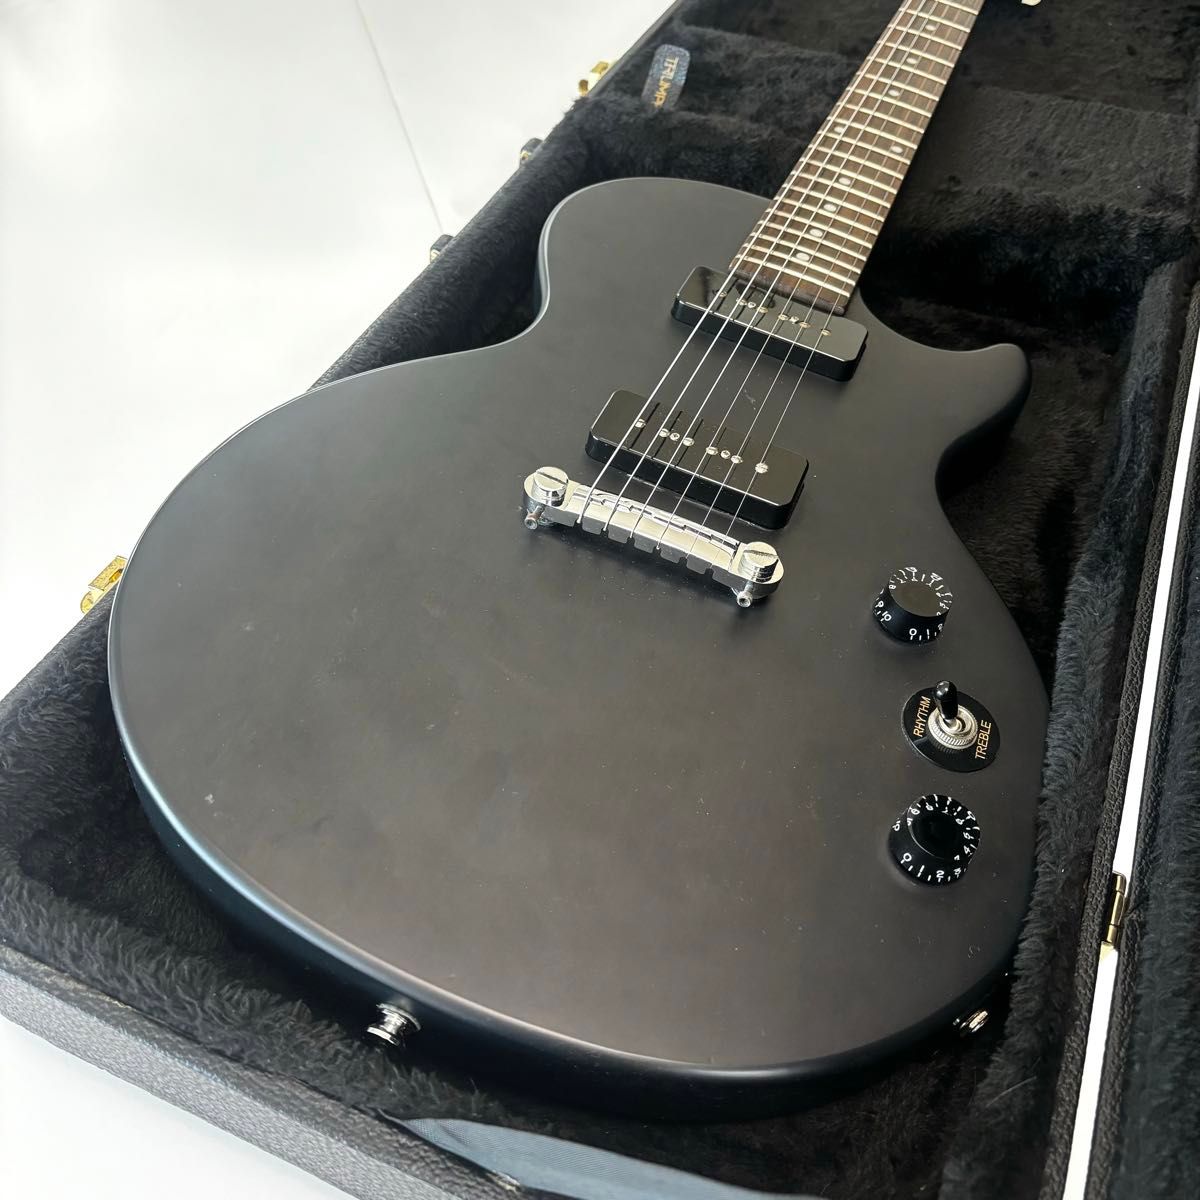 【P90ピックアップ搭載】Epiphone by Gibson レスポール　Special Edition 弦交換済　エレキギター